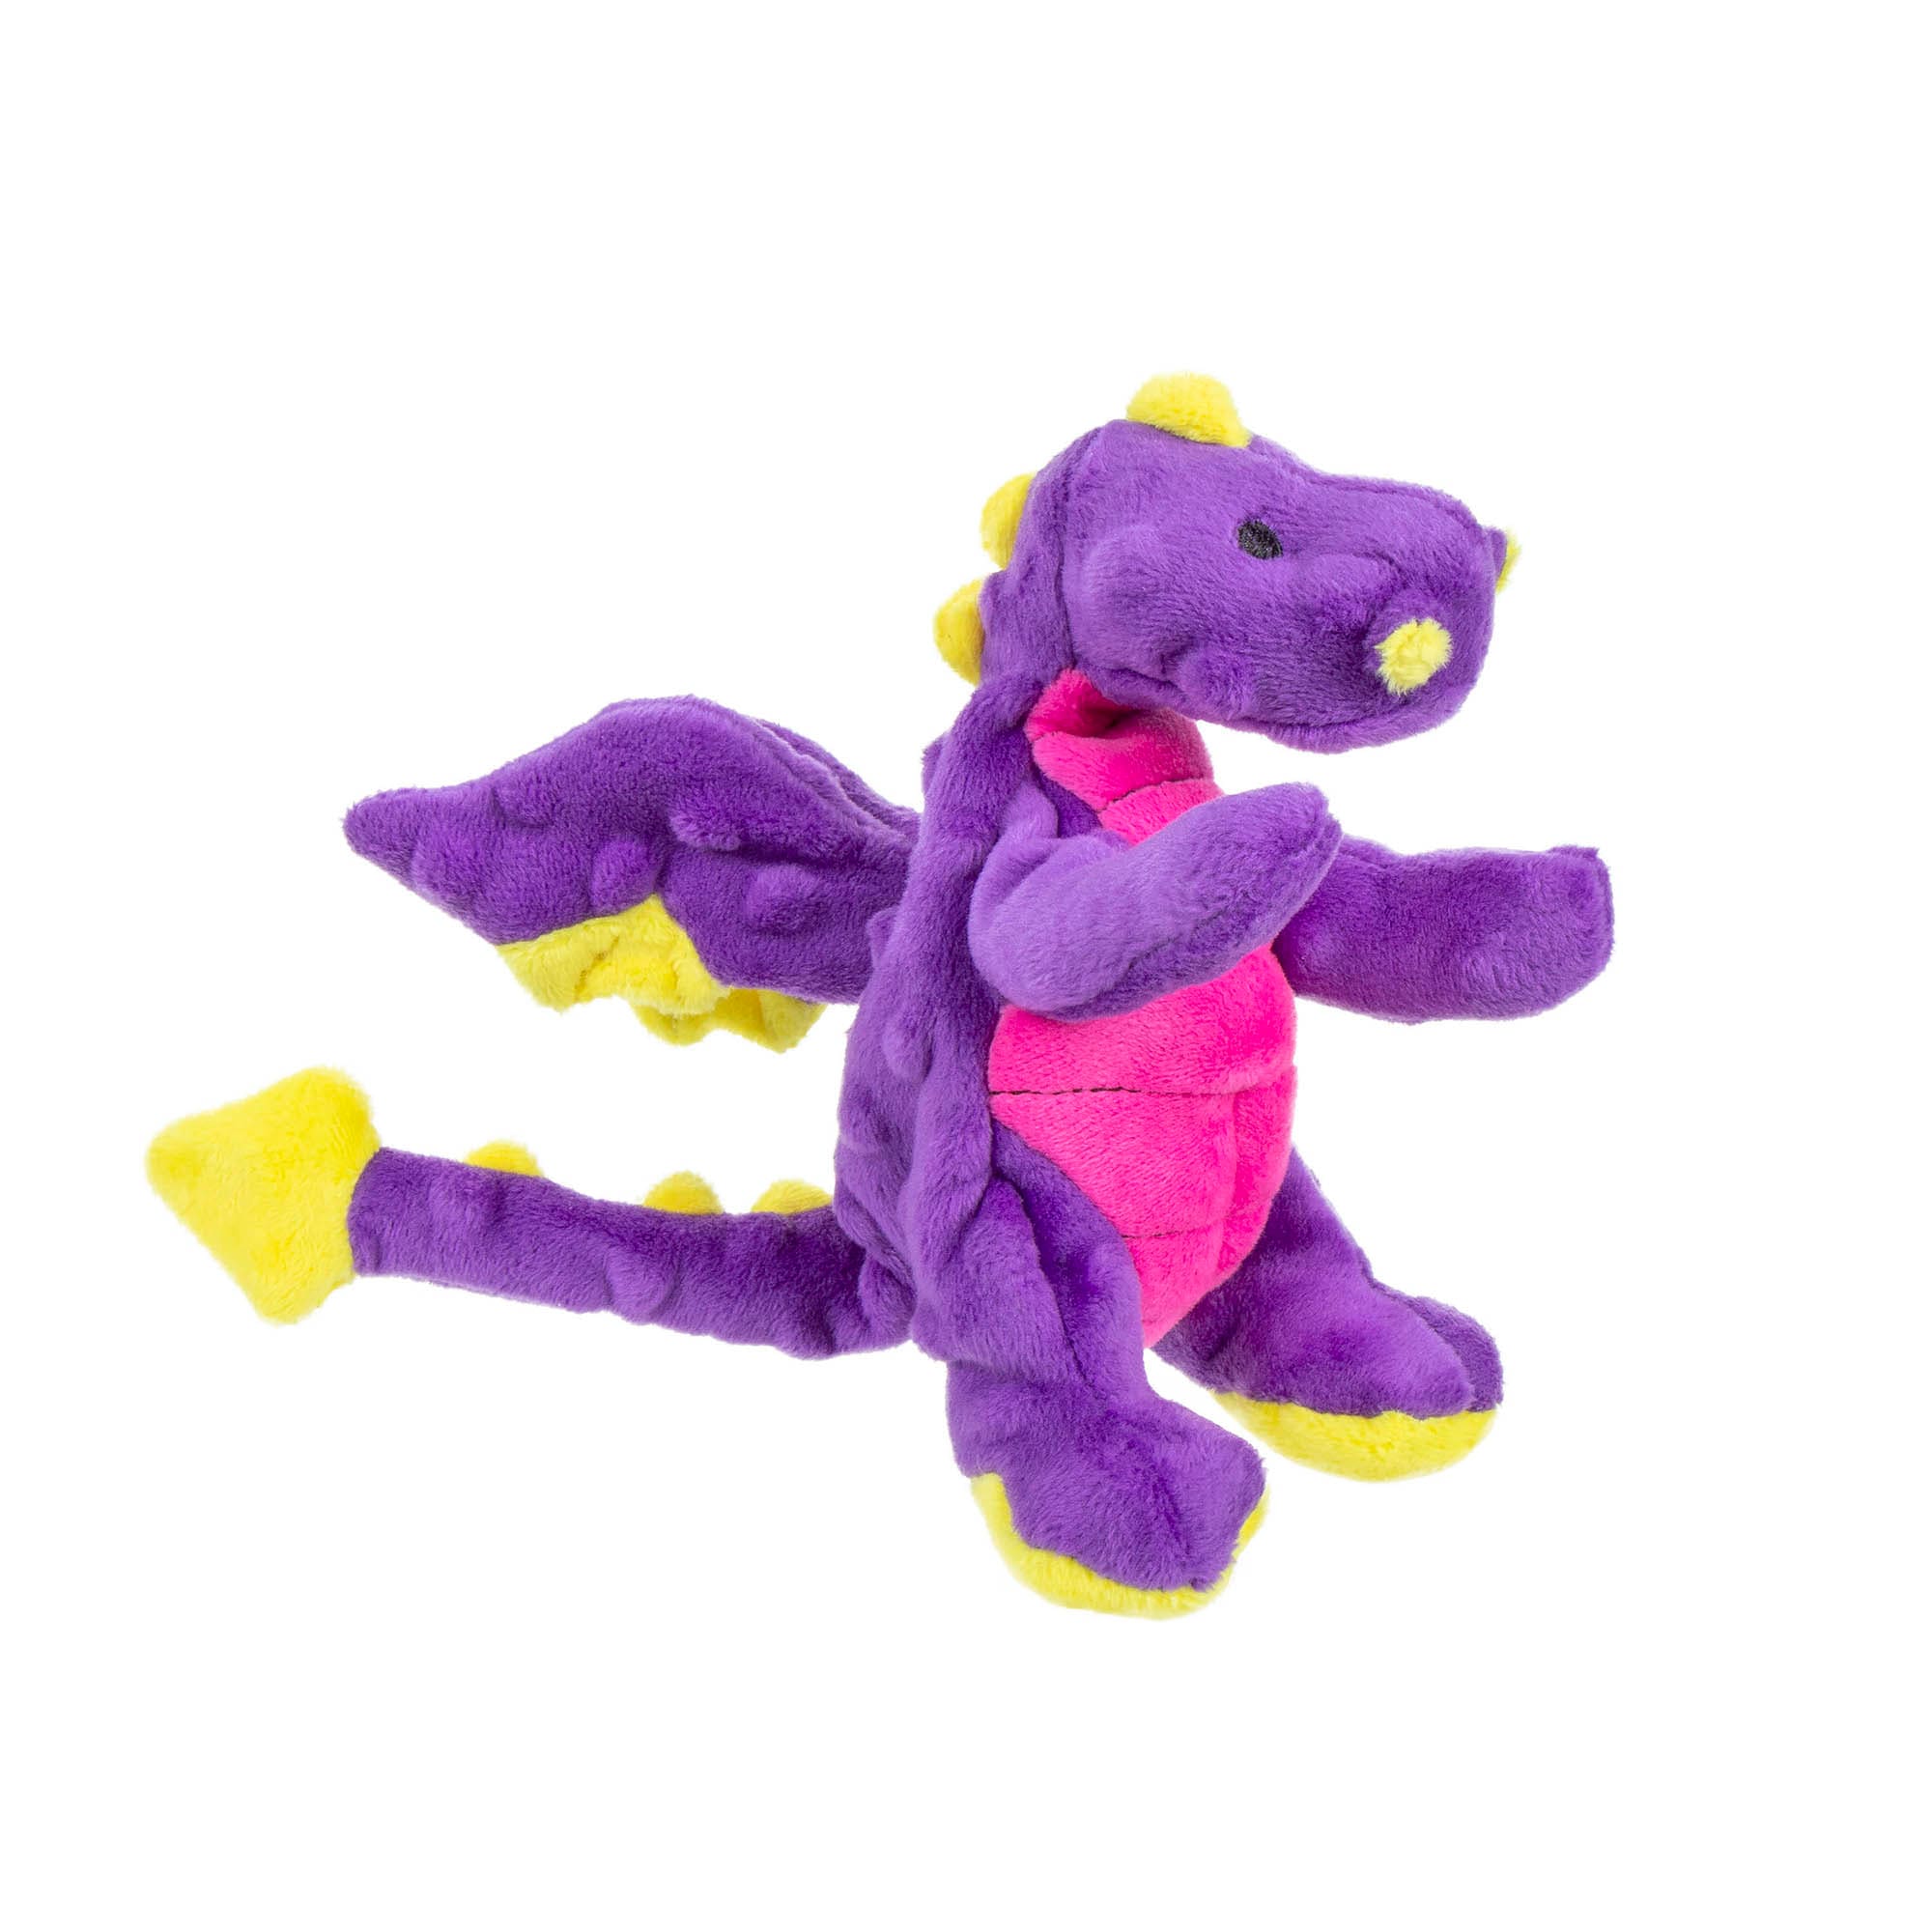 Og Dragon Chew Guard Squeaky Plush Small Purple Dog Toy Petco